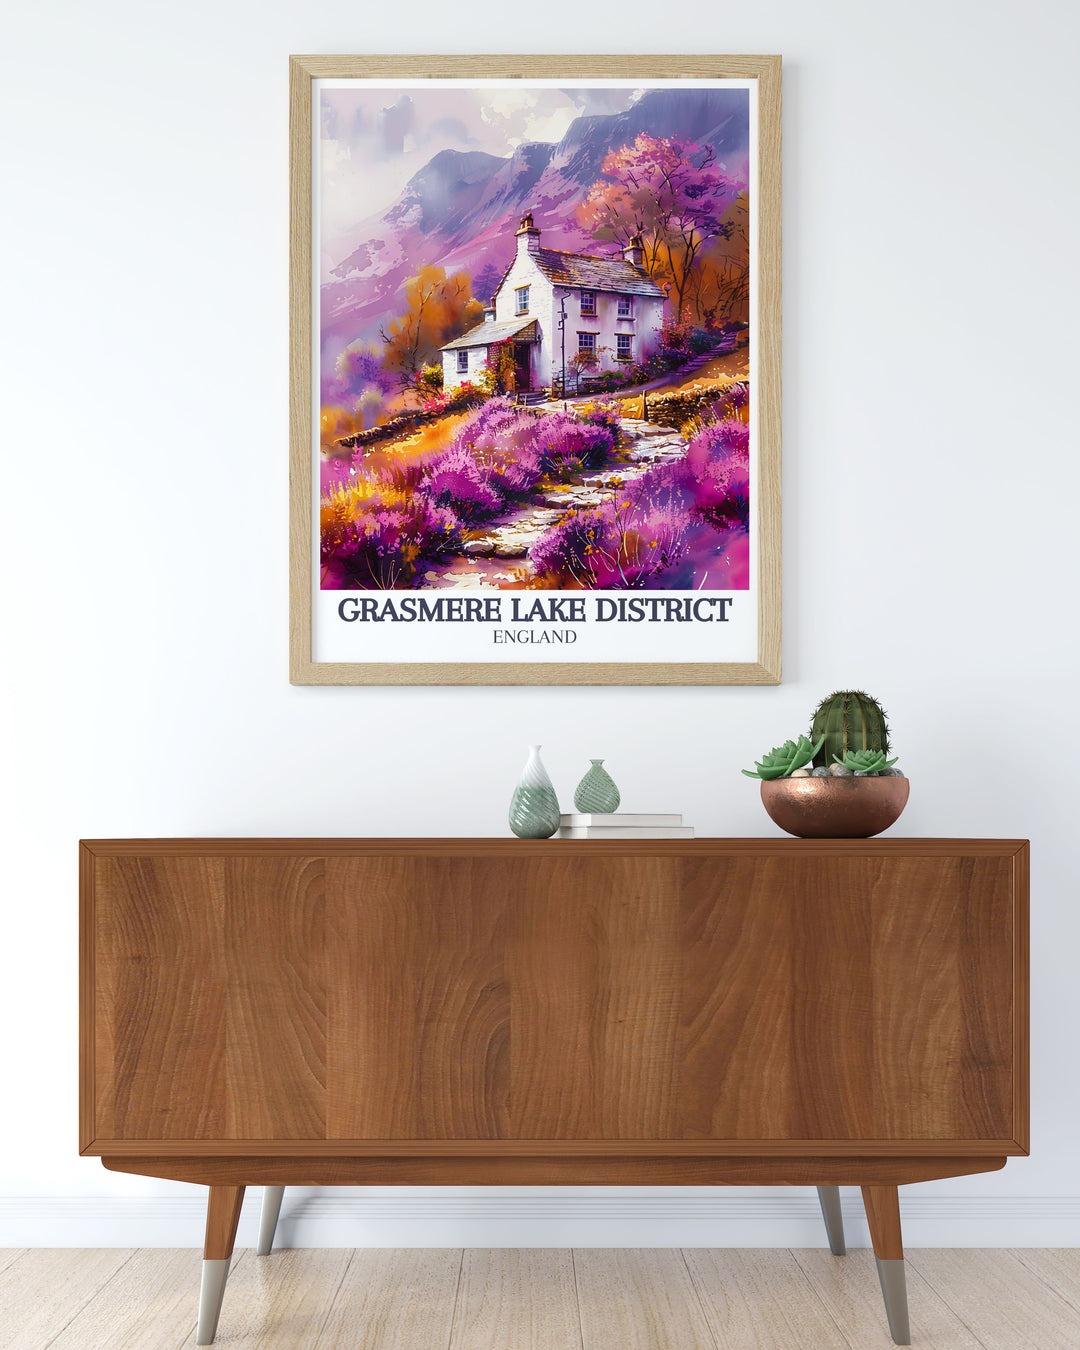 This detailed illustration of Grasmere Lake and Village captures the serene landscape and historic charm of the Lake District, England, making it an ideal piece for enhancing your home with natural and cultural beauty.